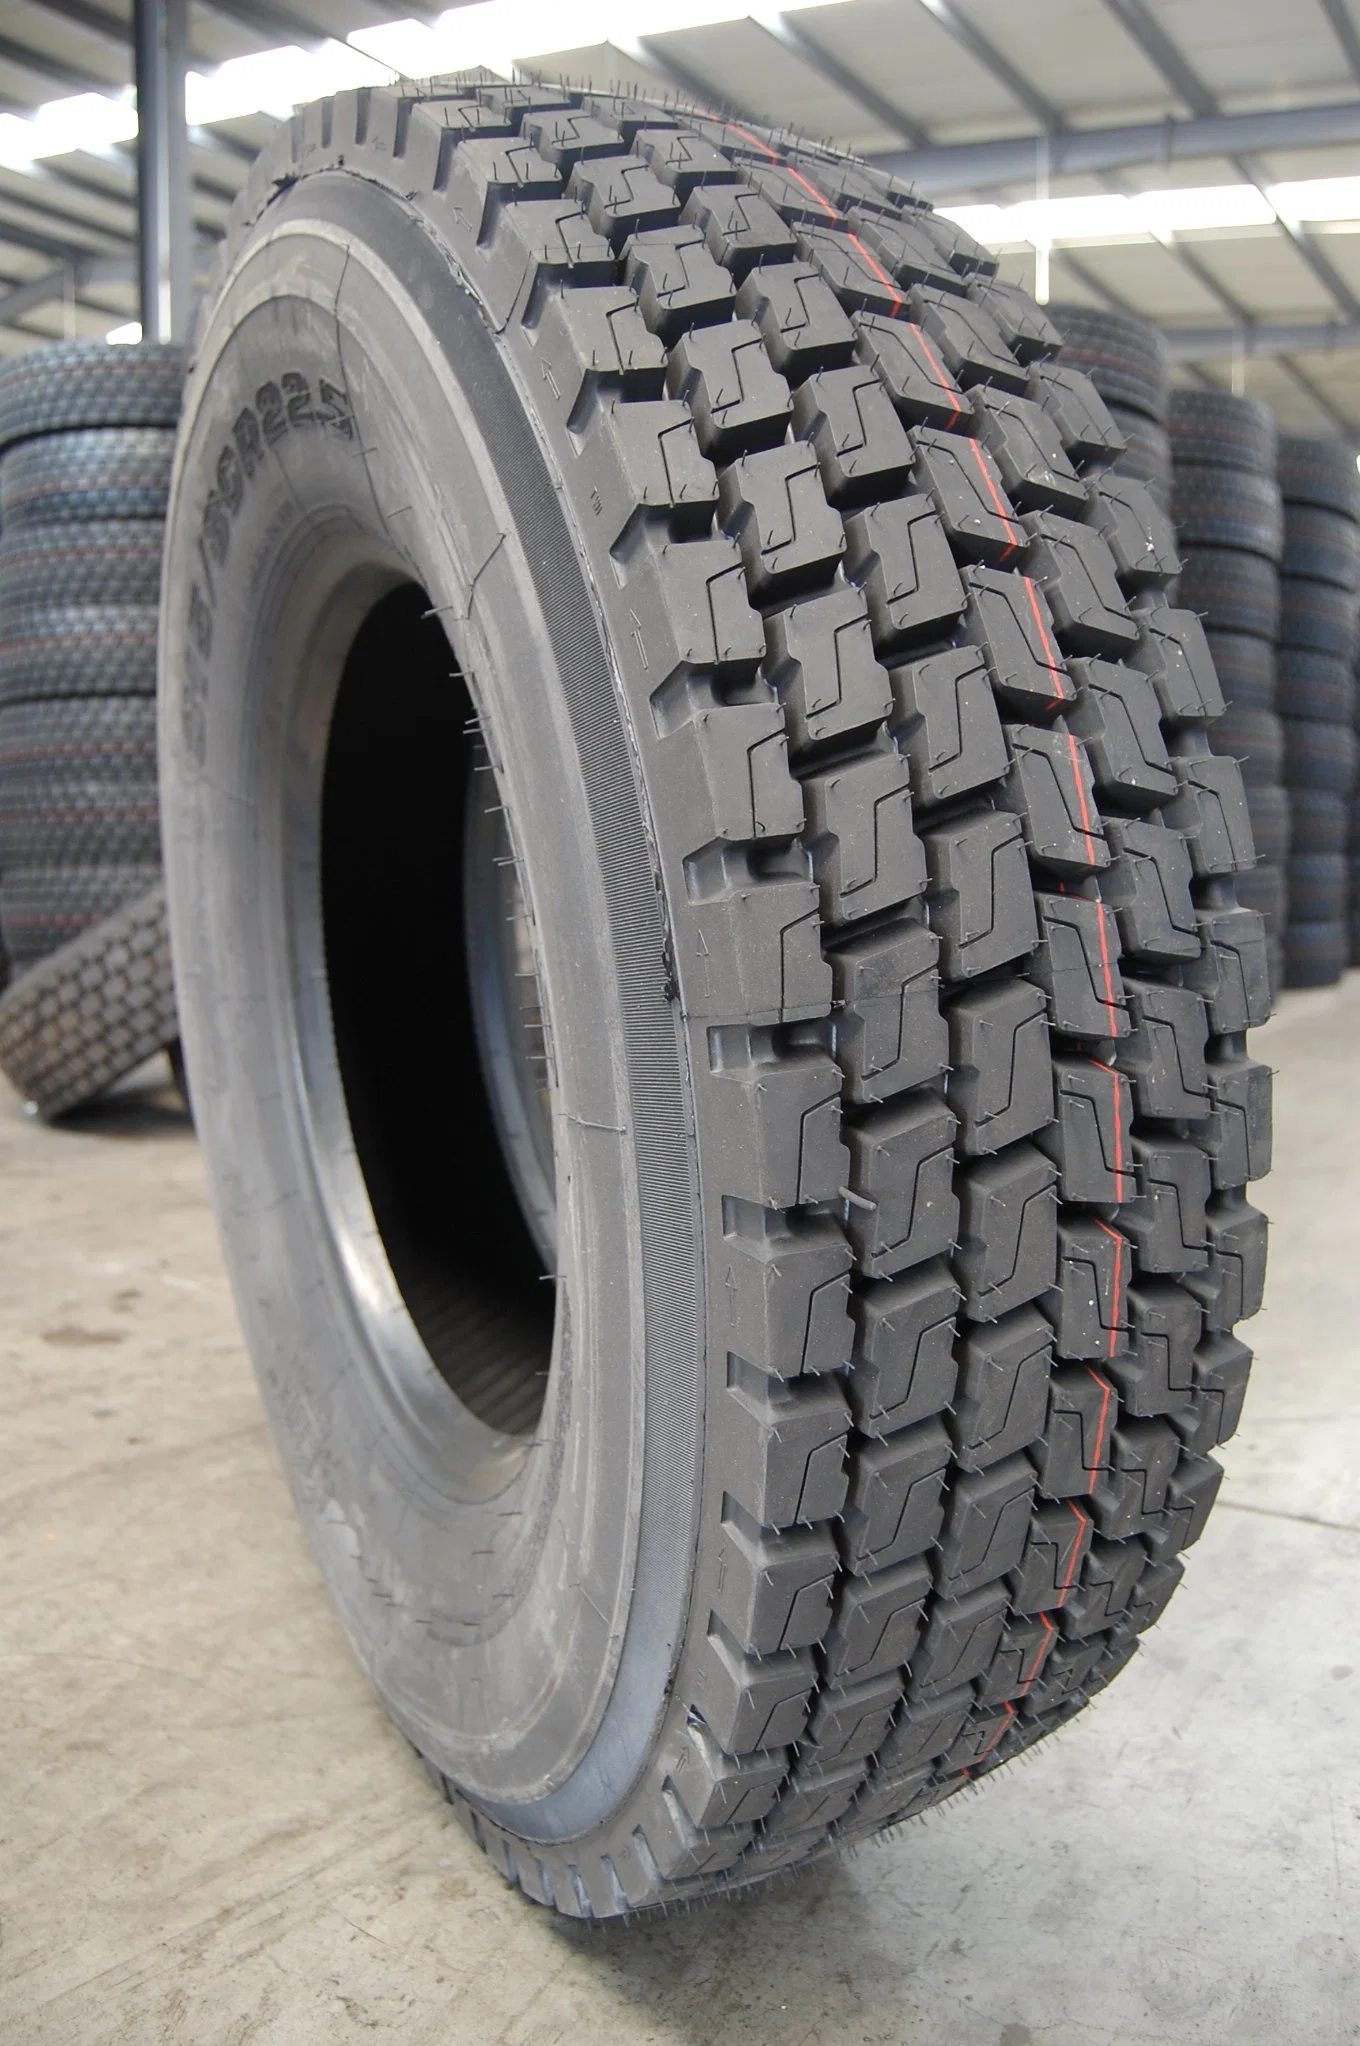 Constancy Brand Truck Tire 668 Pattern Tubeless Sizes